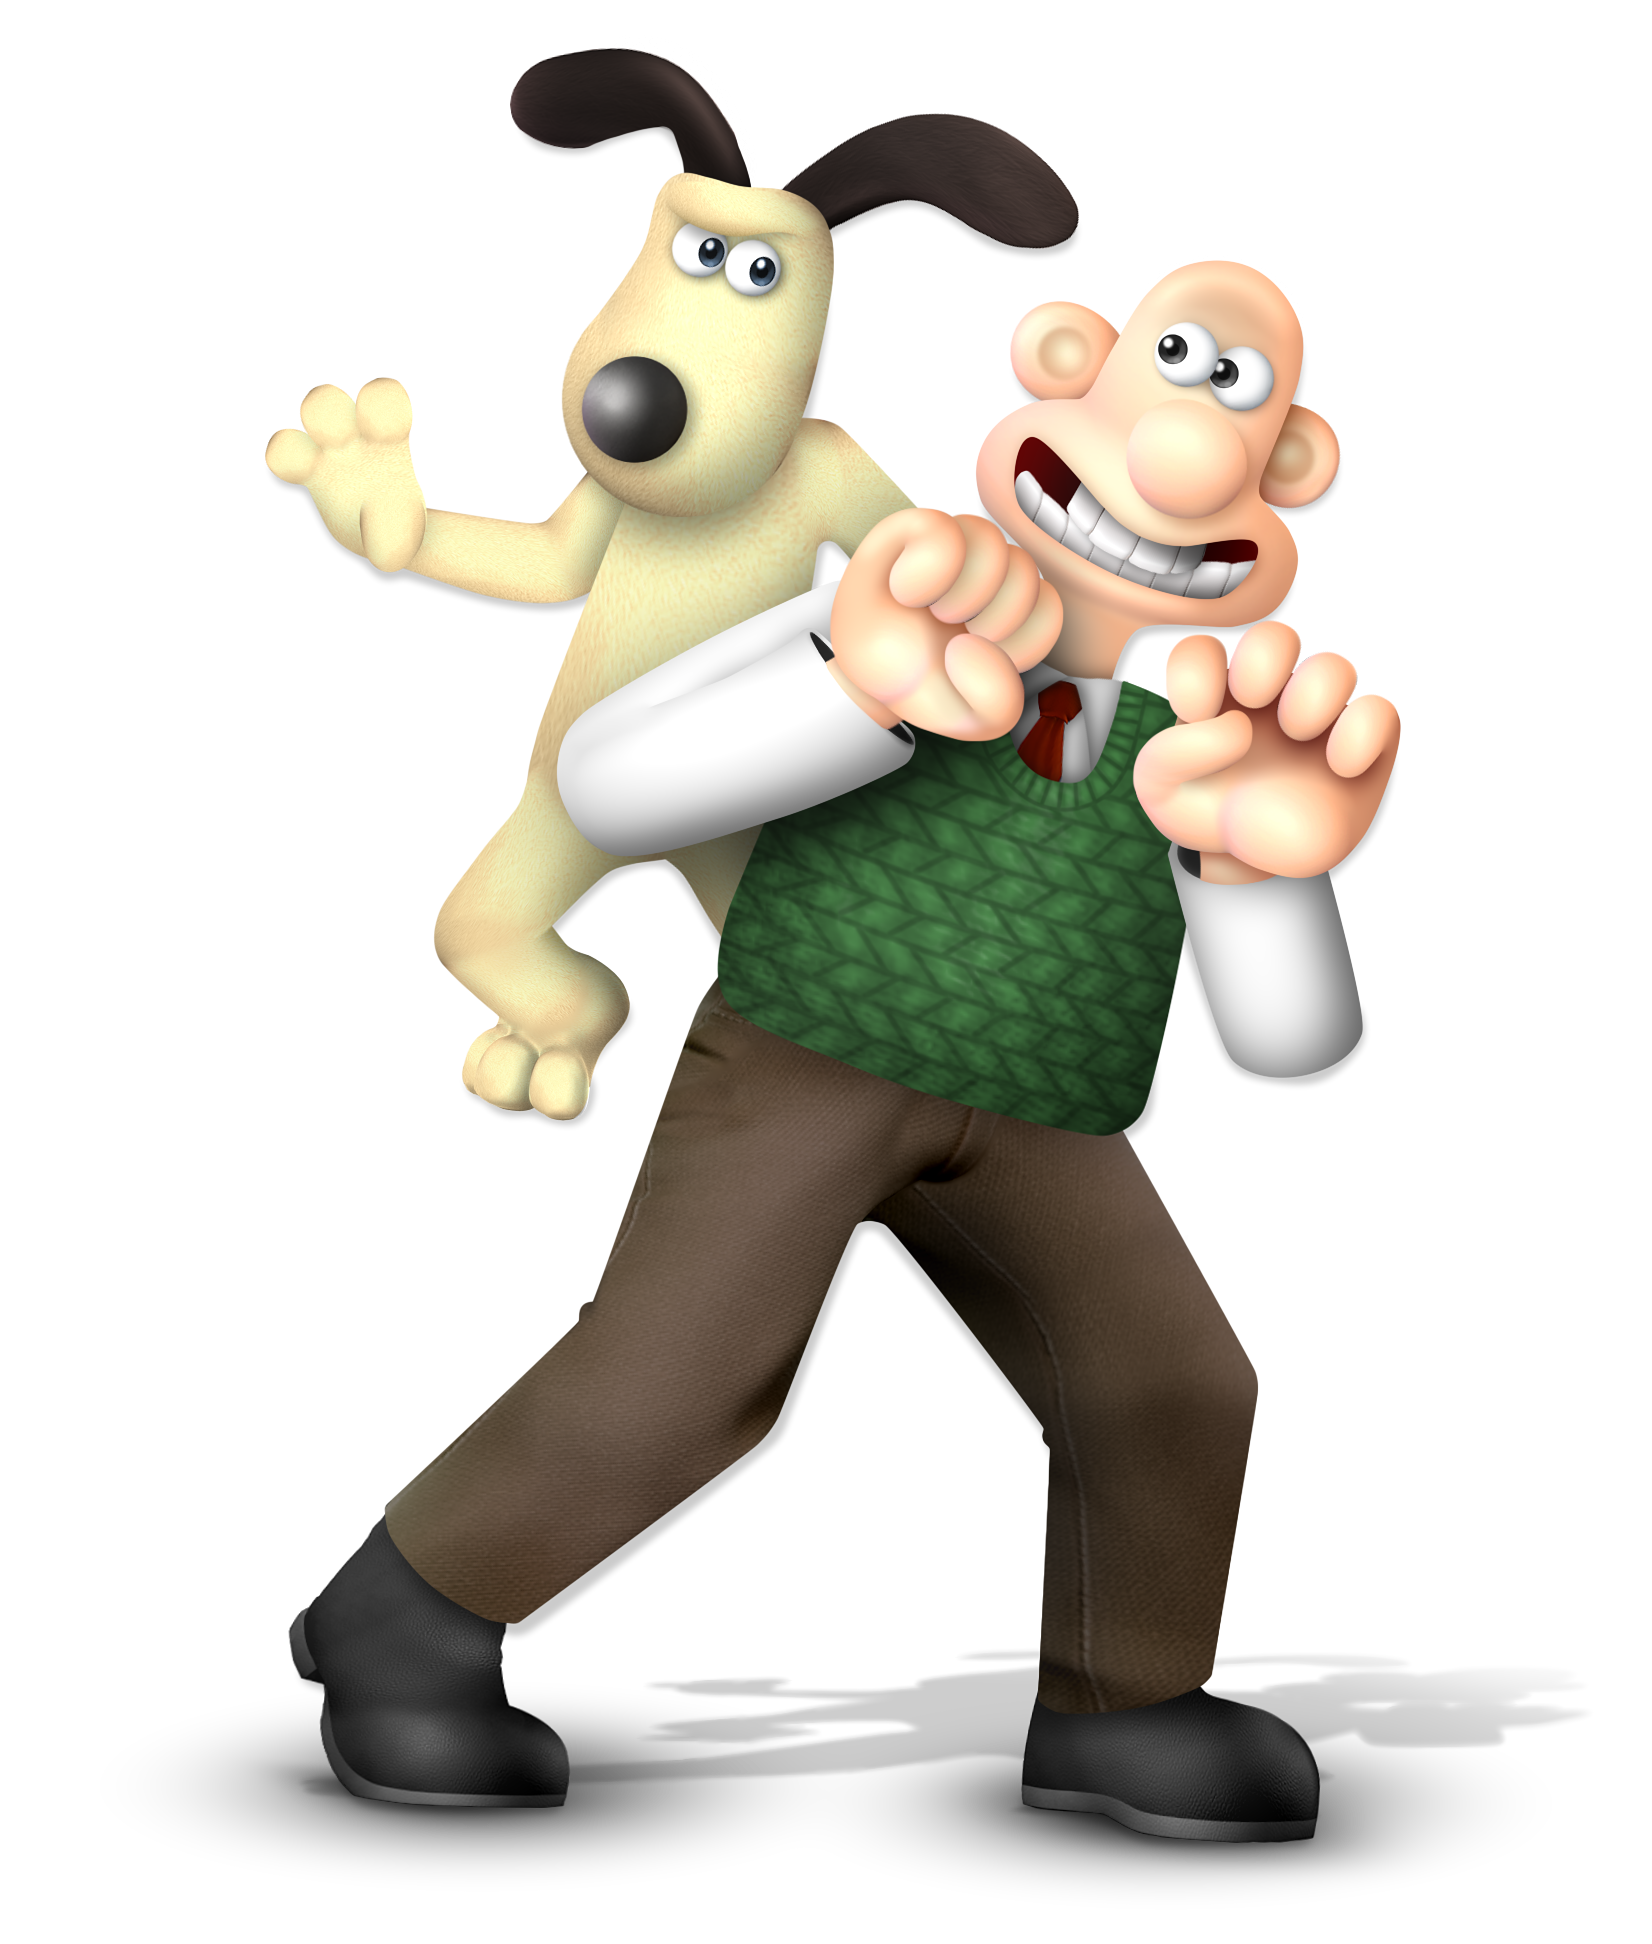 wallace-and-gromit-joins-the-battle-by-funtimeshadowfreddy-on-deviantart